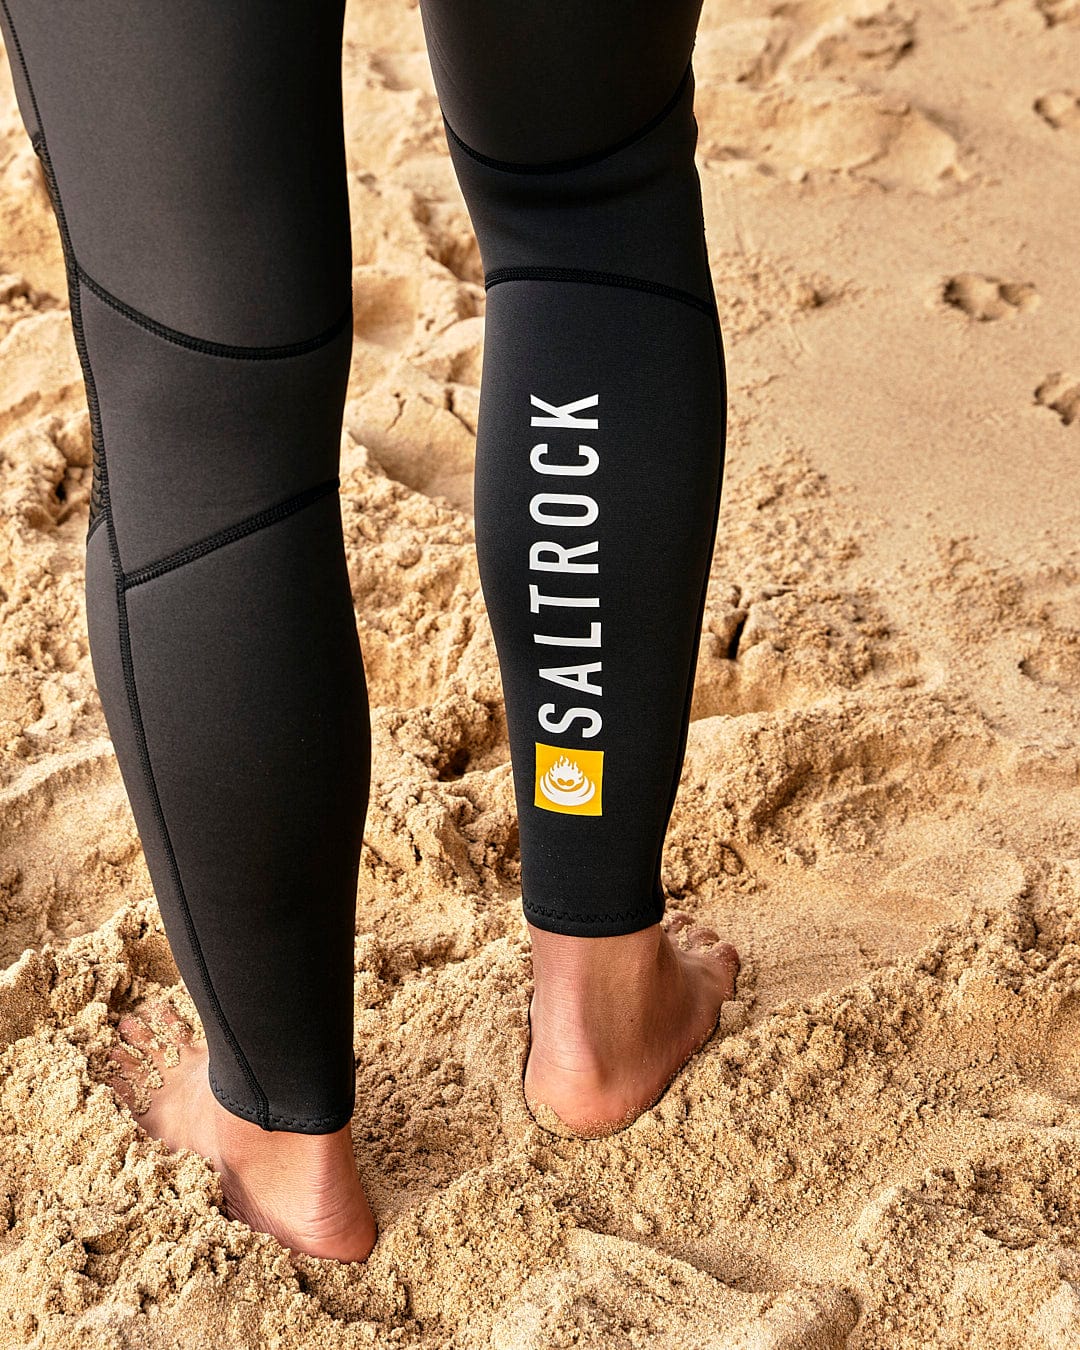 A person wearing a Saltrock Geo Camo - Mens 3/2 Full Wetsuit - Black standing on the sand.